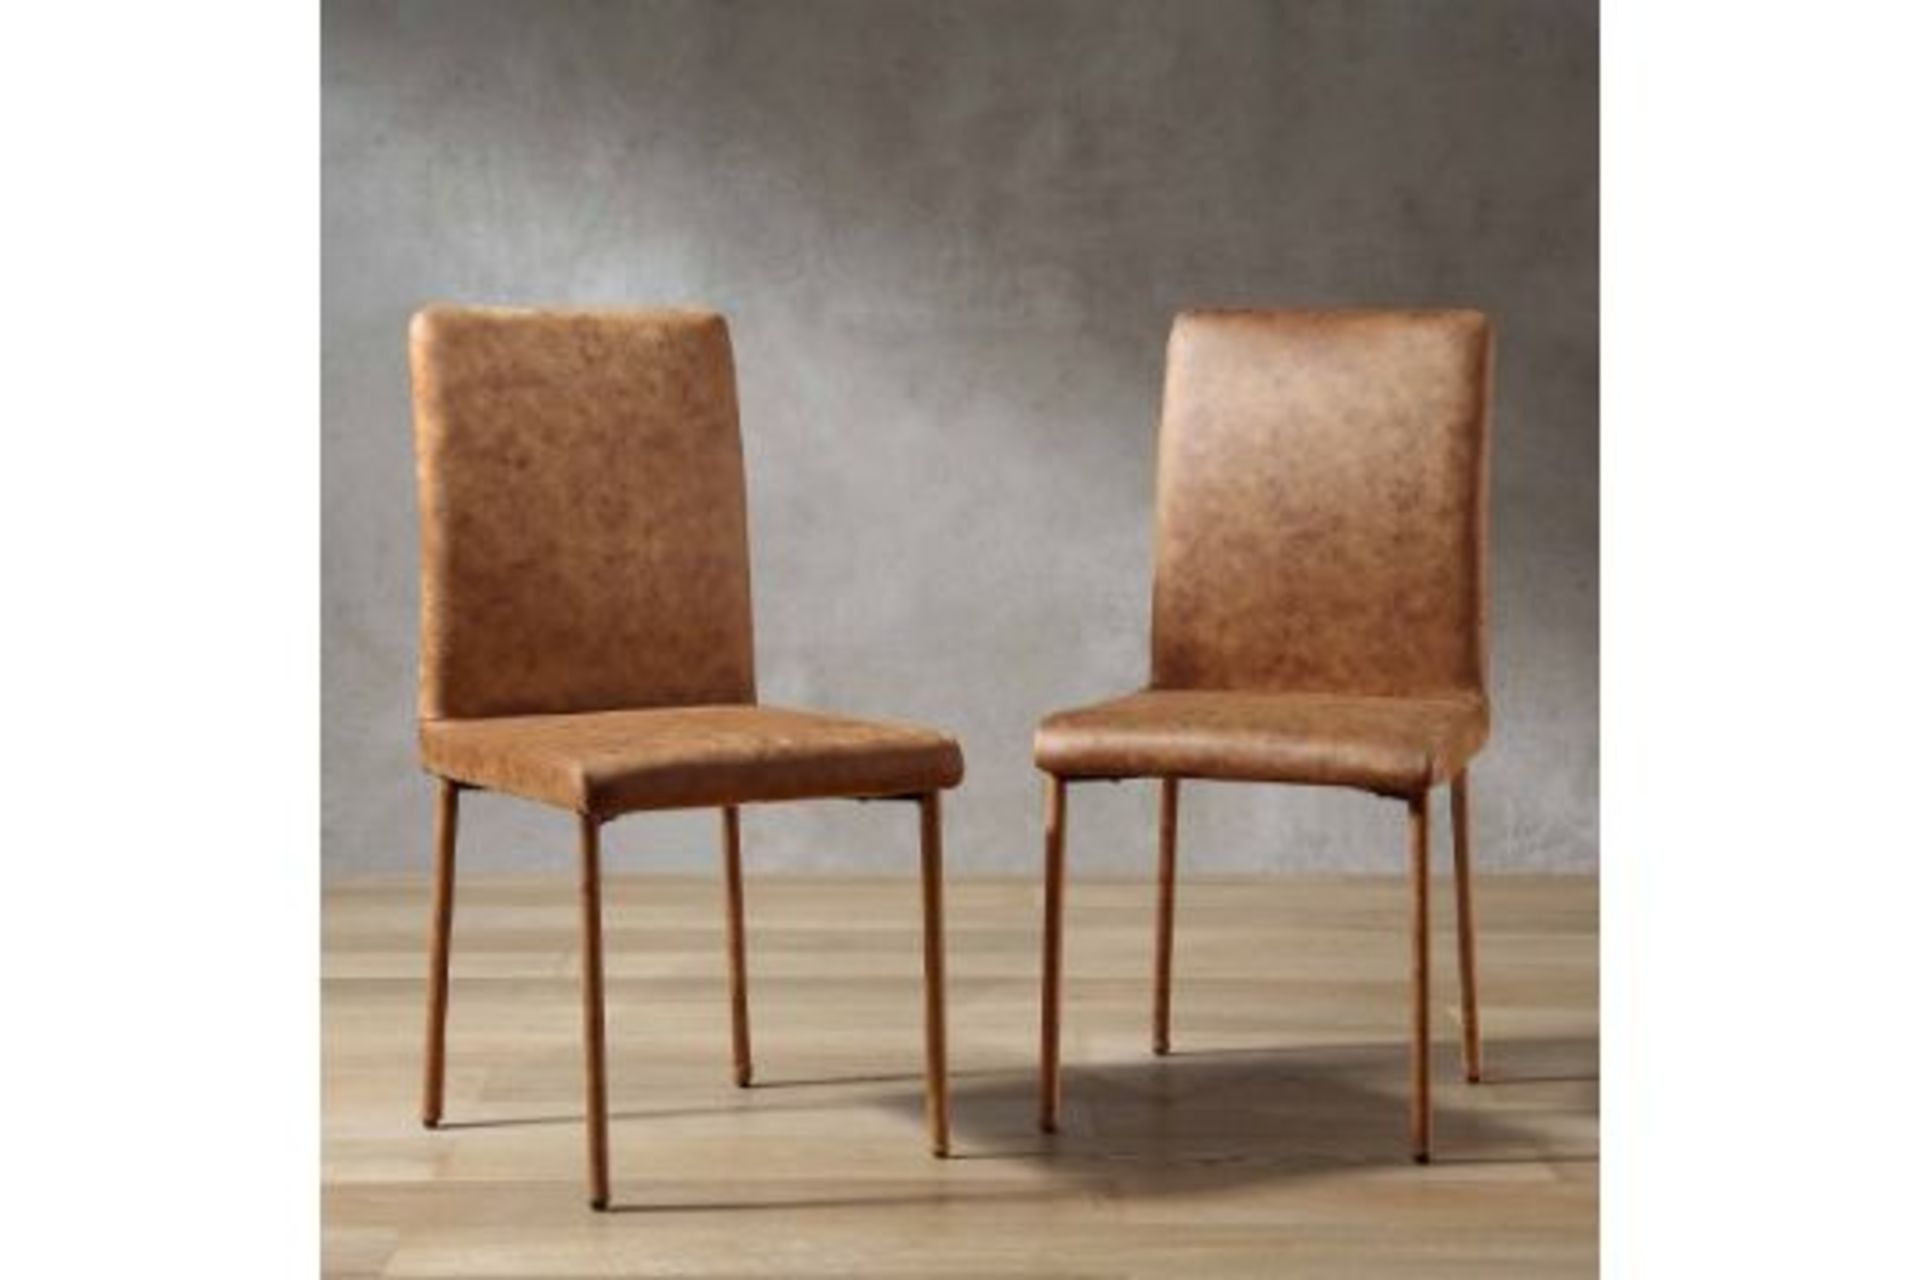 Fernie Set of 2 Cognac Vegan Leather Dining Chairs with Upholstered Legs. - BI.11. RRP £179.99. (